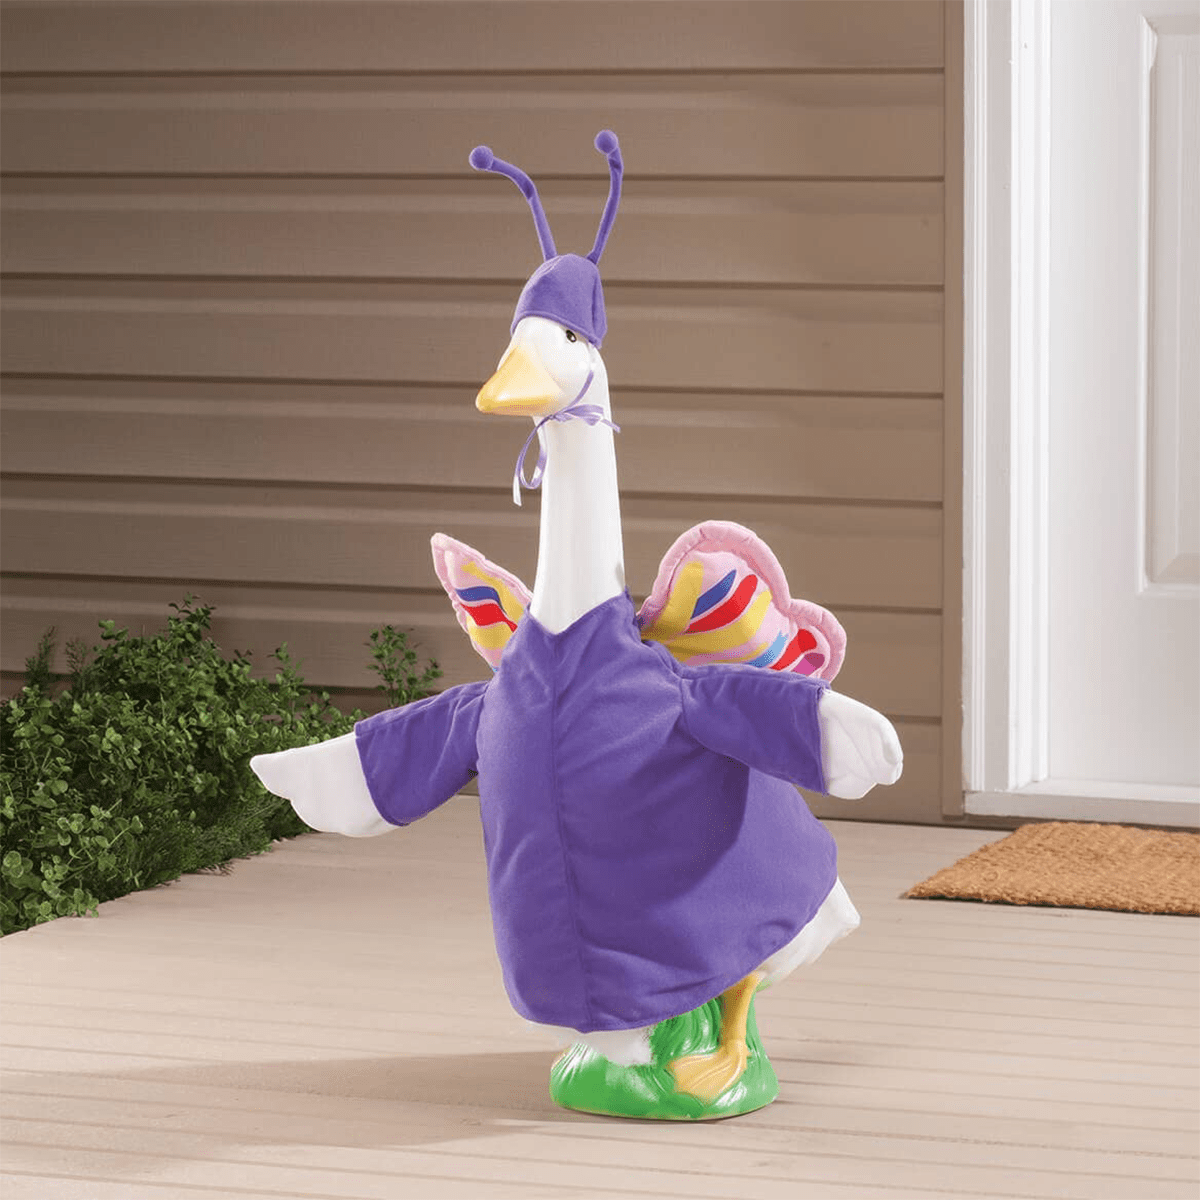 Fox Valley Traders Butterfly Goose Outfit Ecomm Via Amazon.com